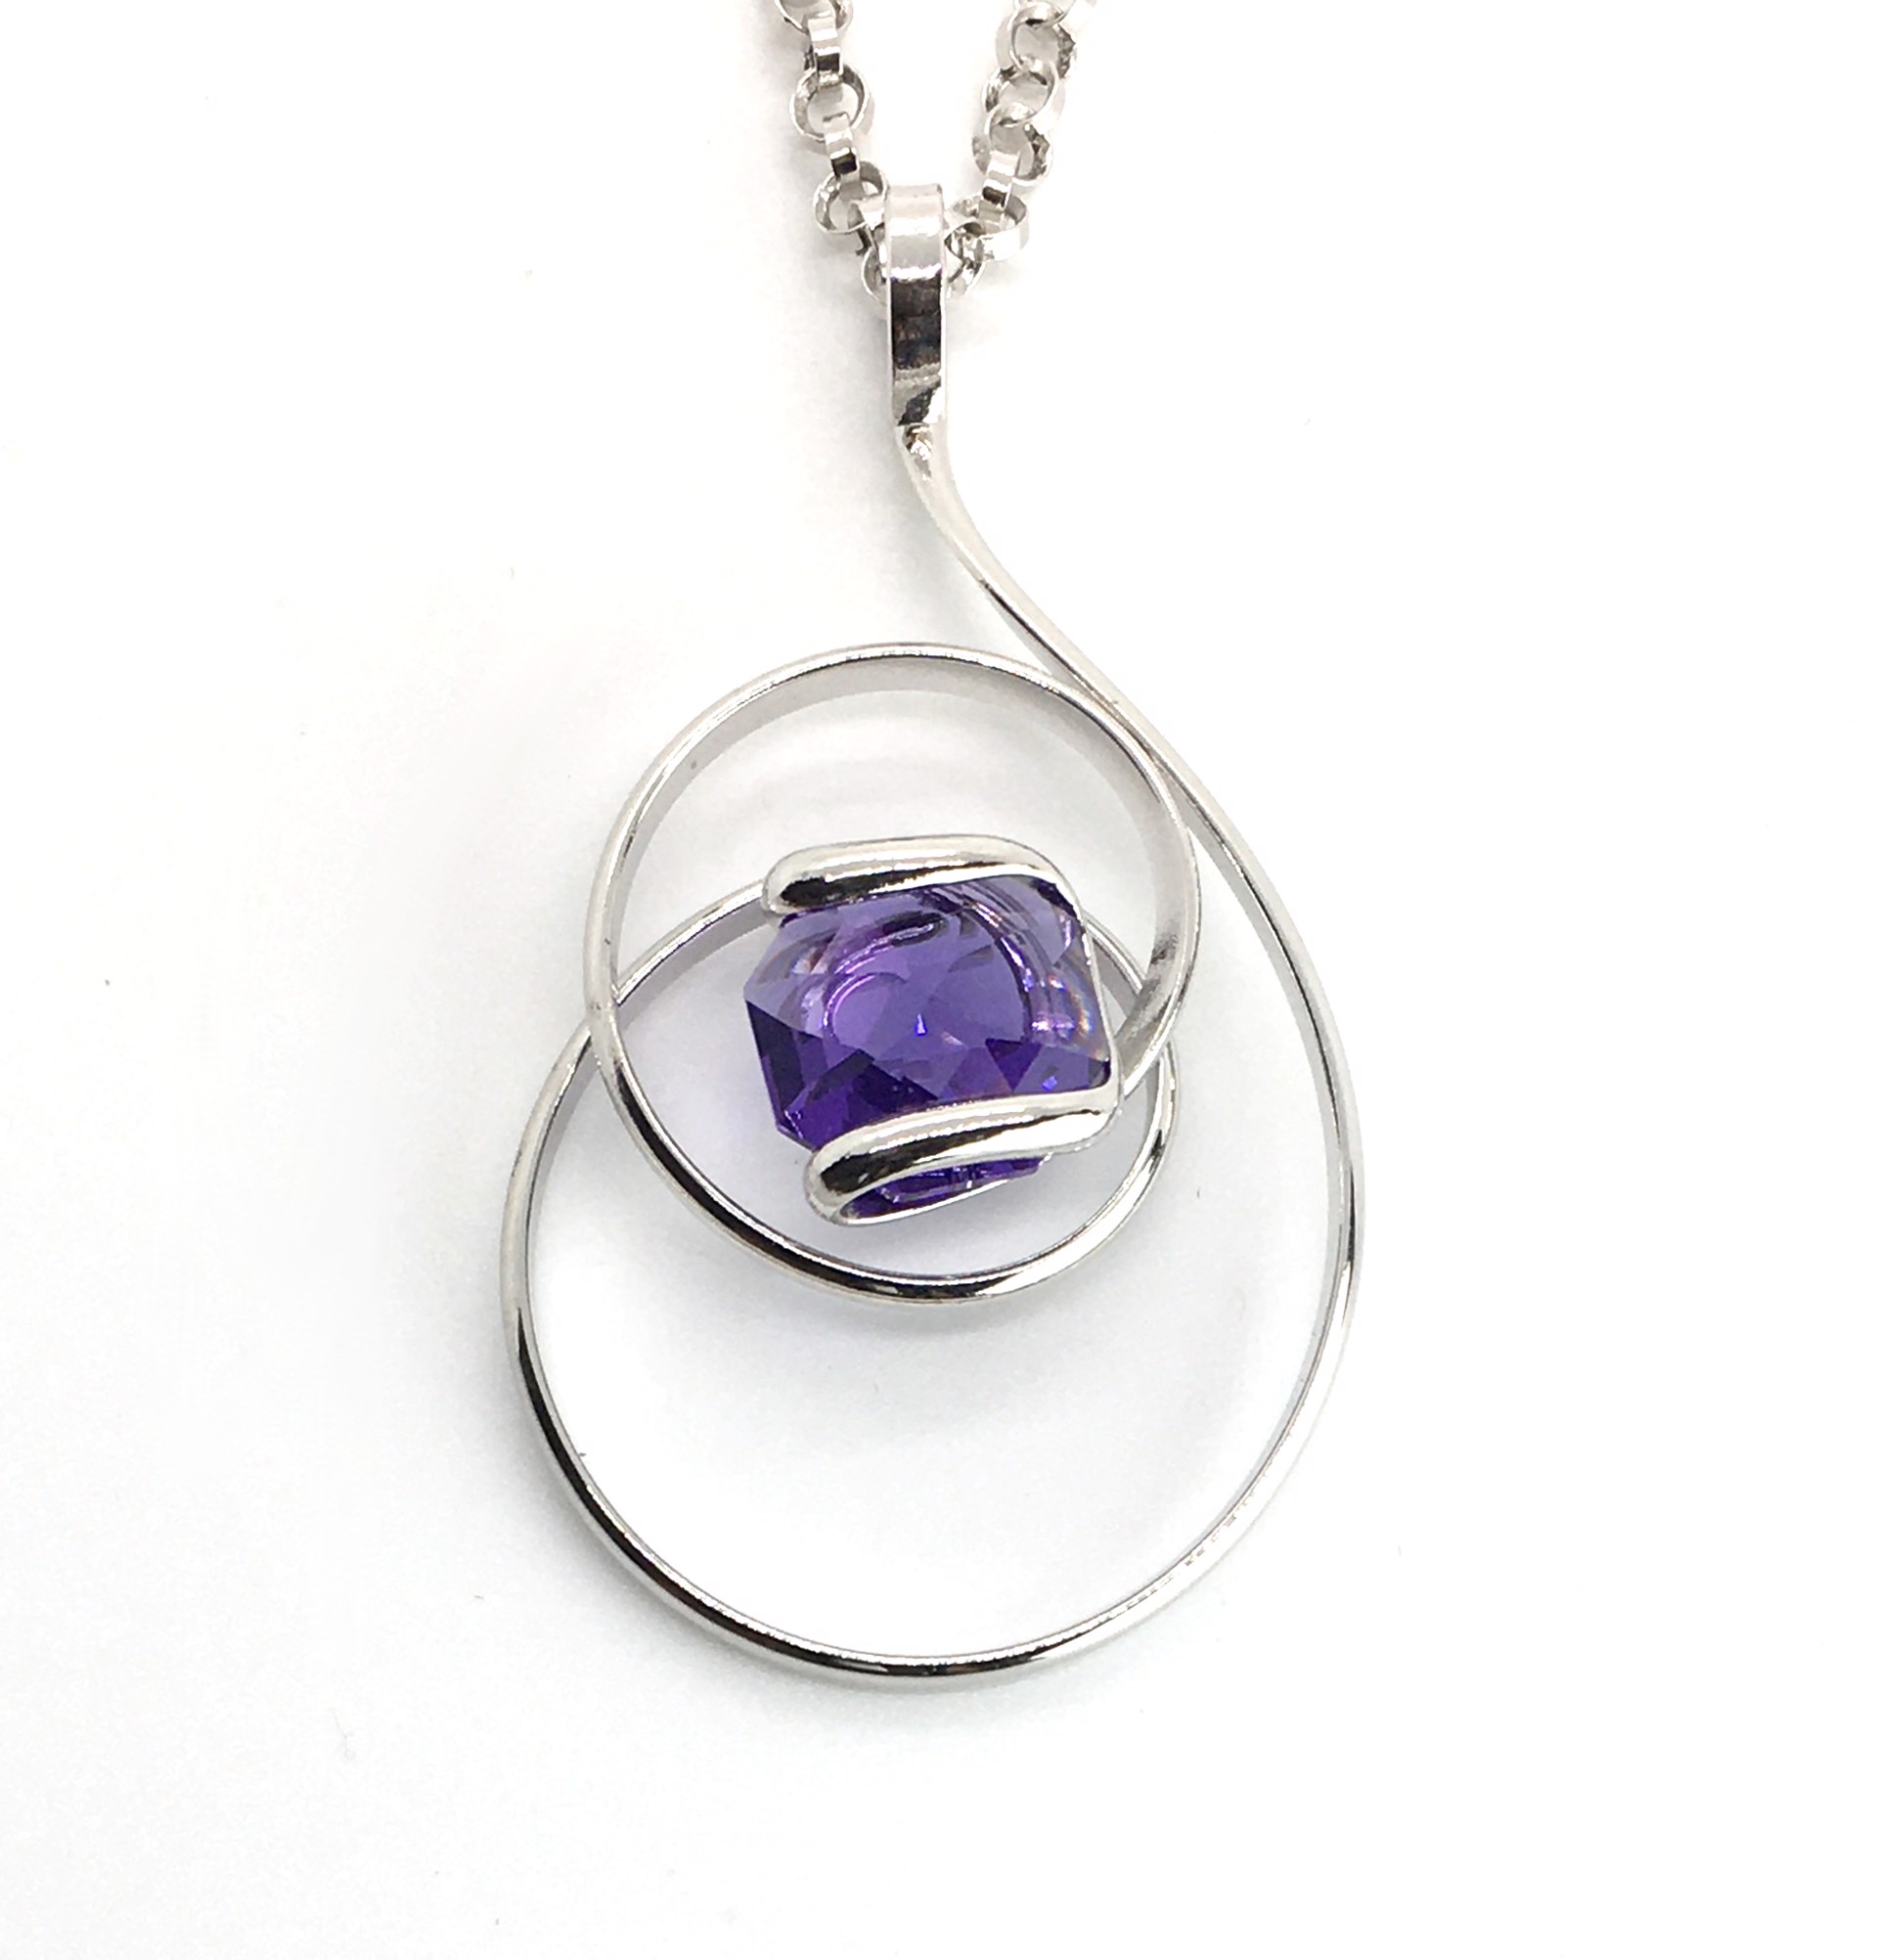 Pendant ~  Purple Austrian Swarovski Crystal ~  Mixed Metals Triple Coated with Rhodium ~ Handmade Setting ~ Chain Available Separately by Monique Touber